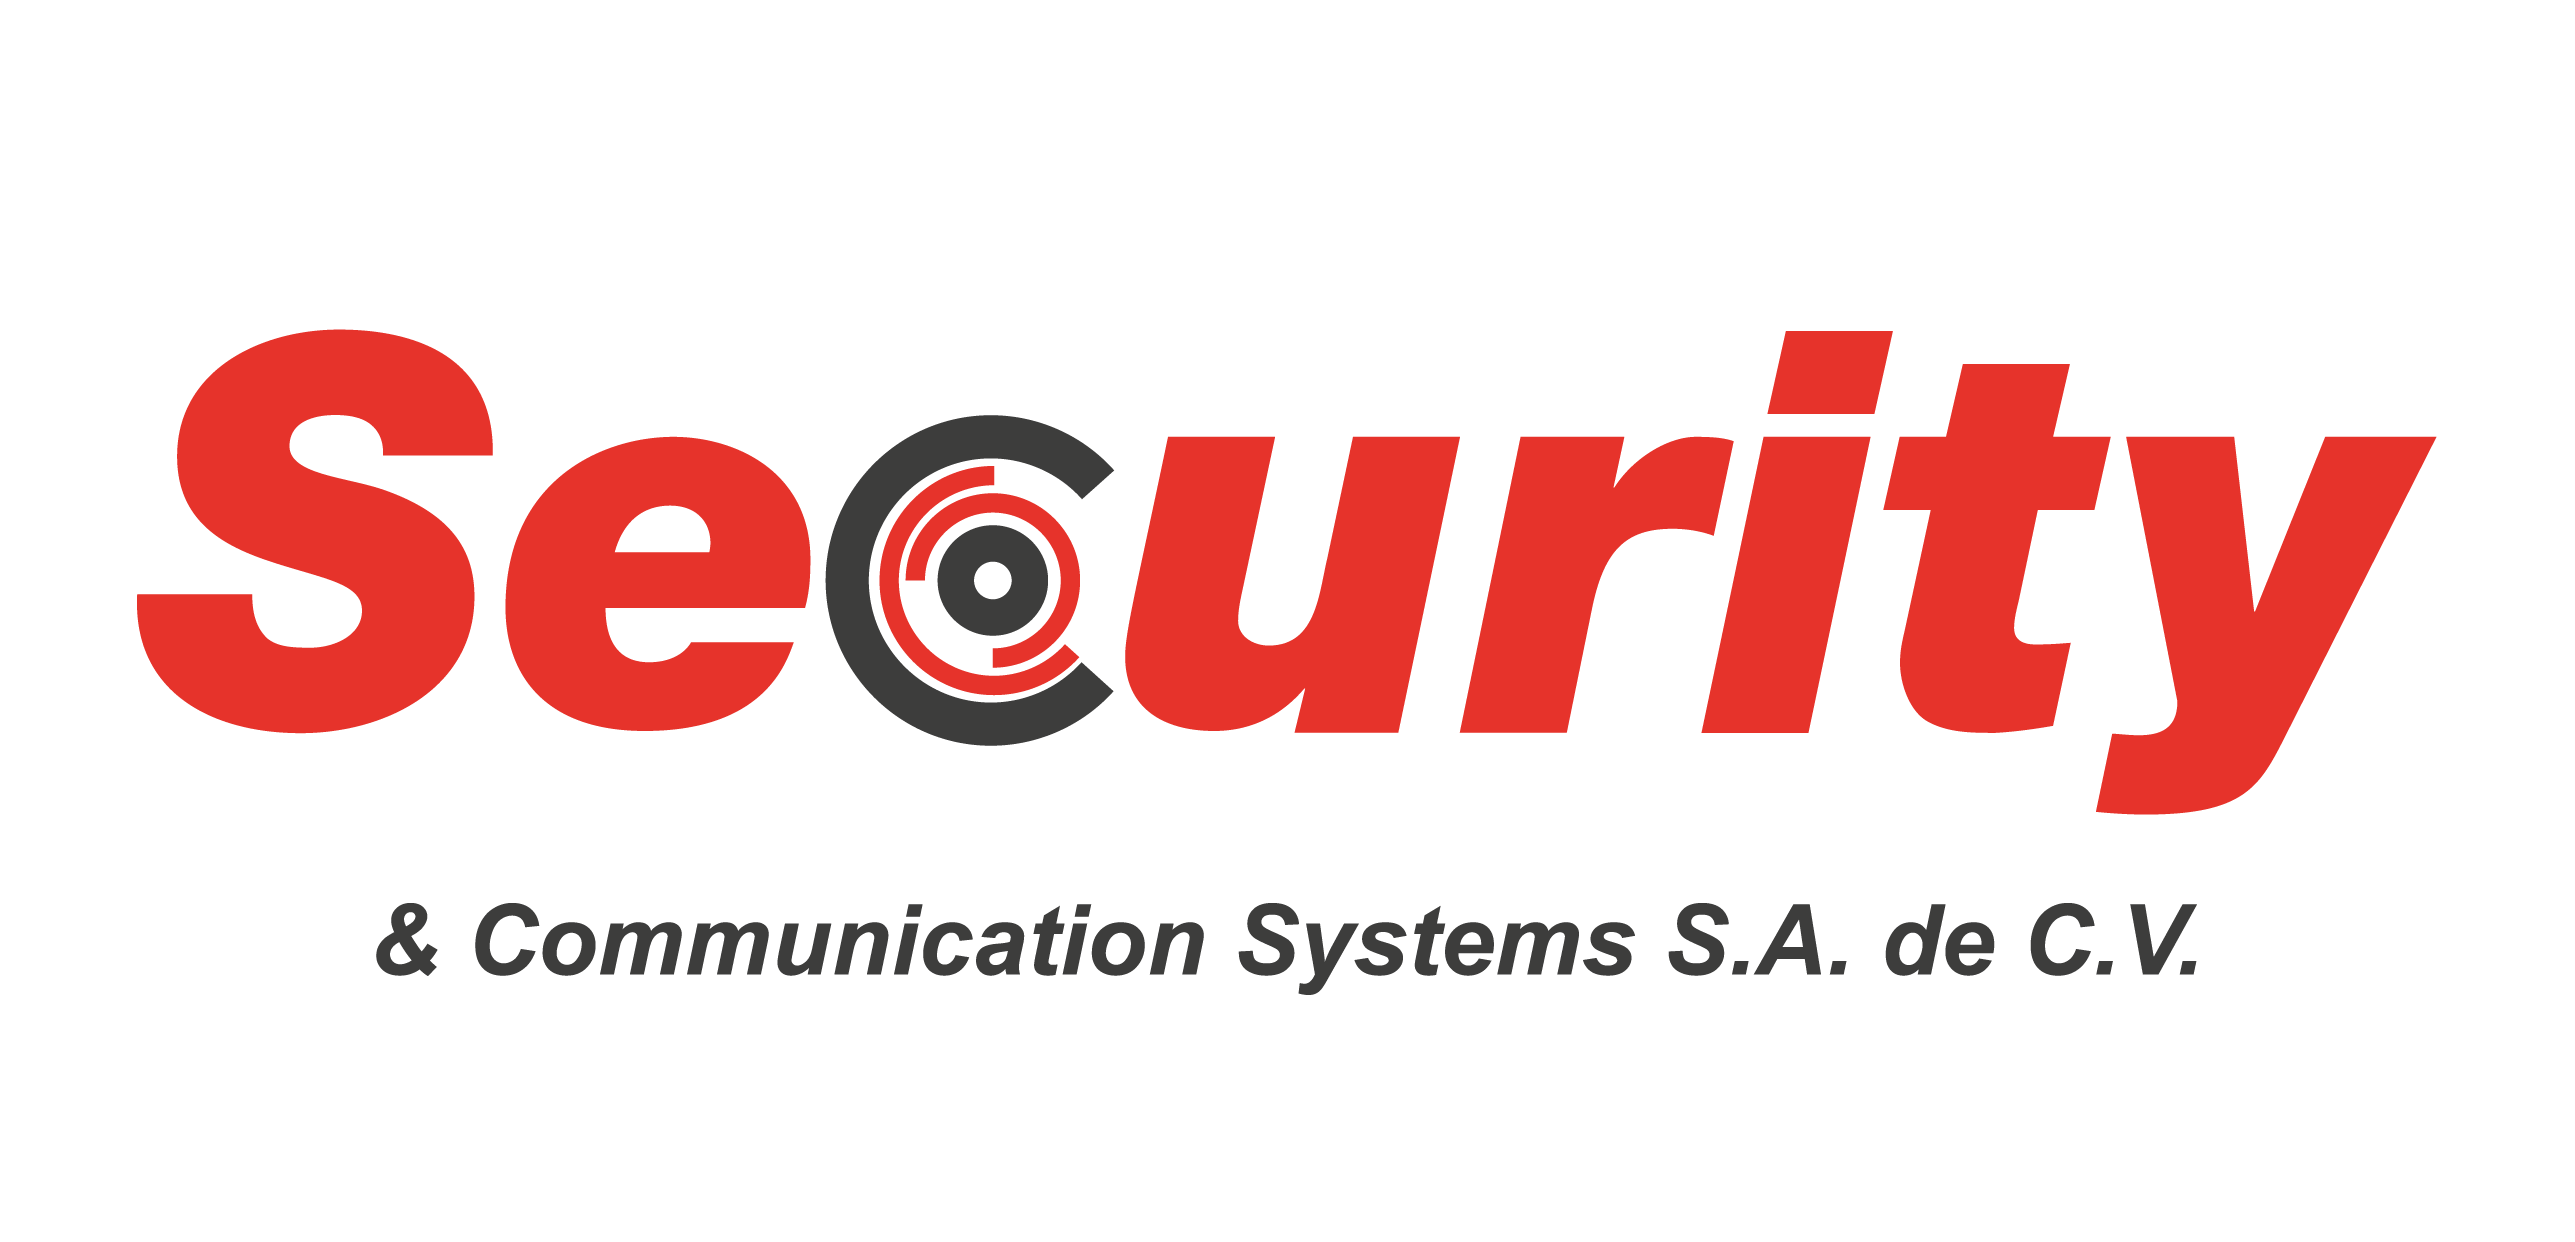 Security & Communication Systems